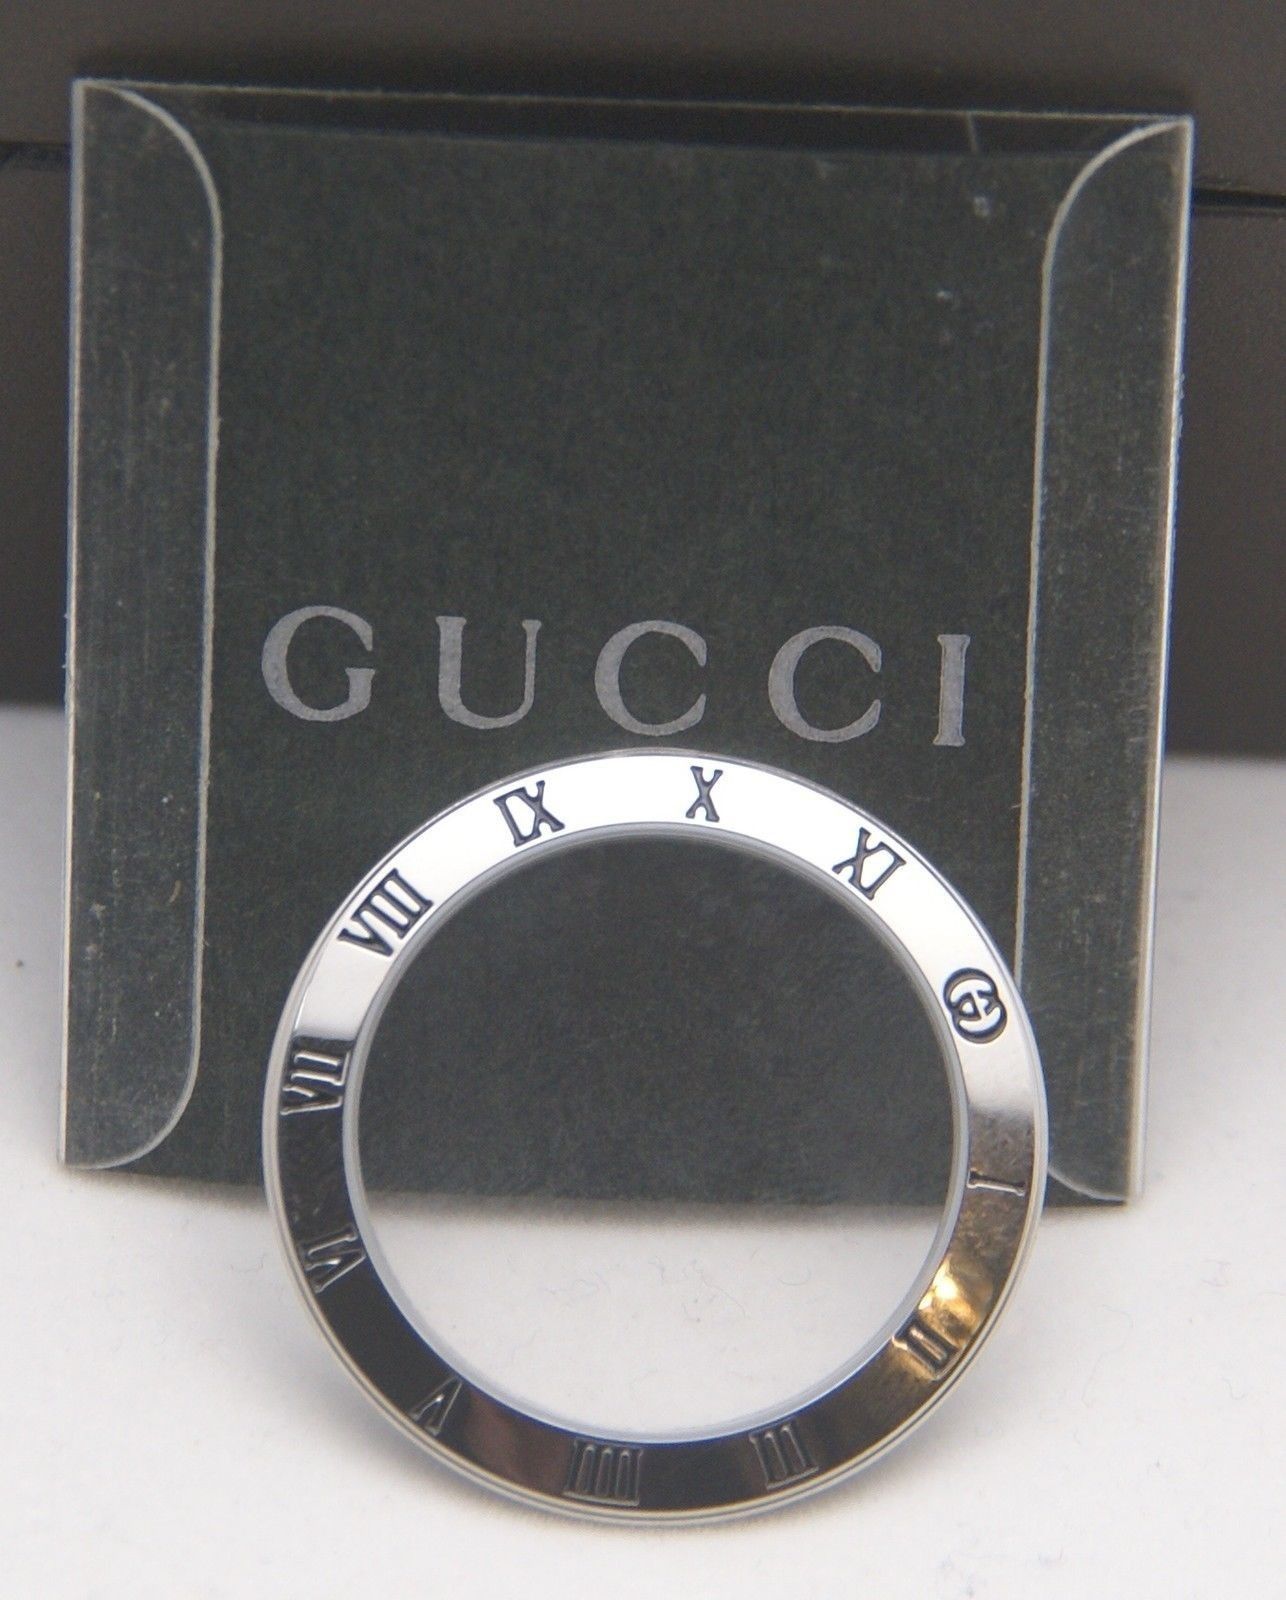 NIB Gucci Replacement Bezel and Crystal - 3000 Watch - Stainless Steel ...